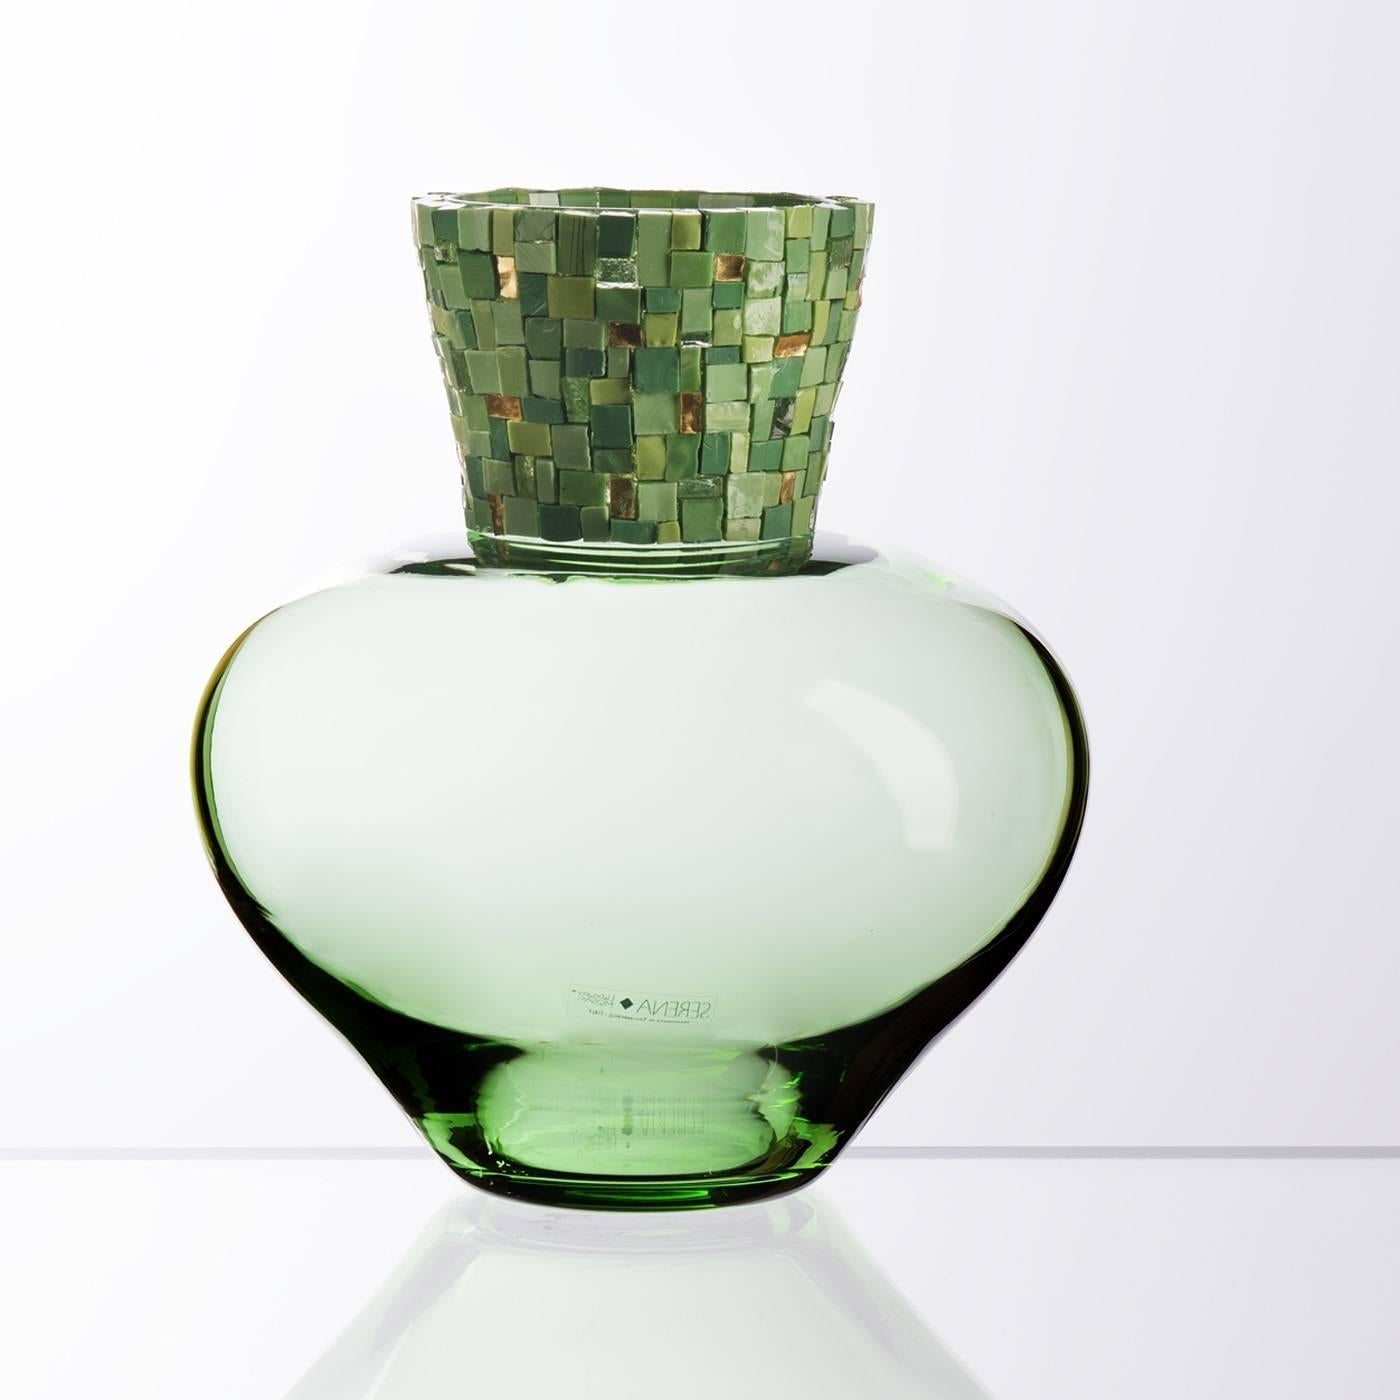 The smooth, round shape of the vase is heightened by the tactile juxtaposition of mosaic accents on its neck that creates a vibrant, gleaming texture. Made of Murano mouth-blown glass in a pale shade of green, this elegant vase features a